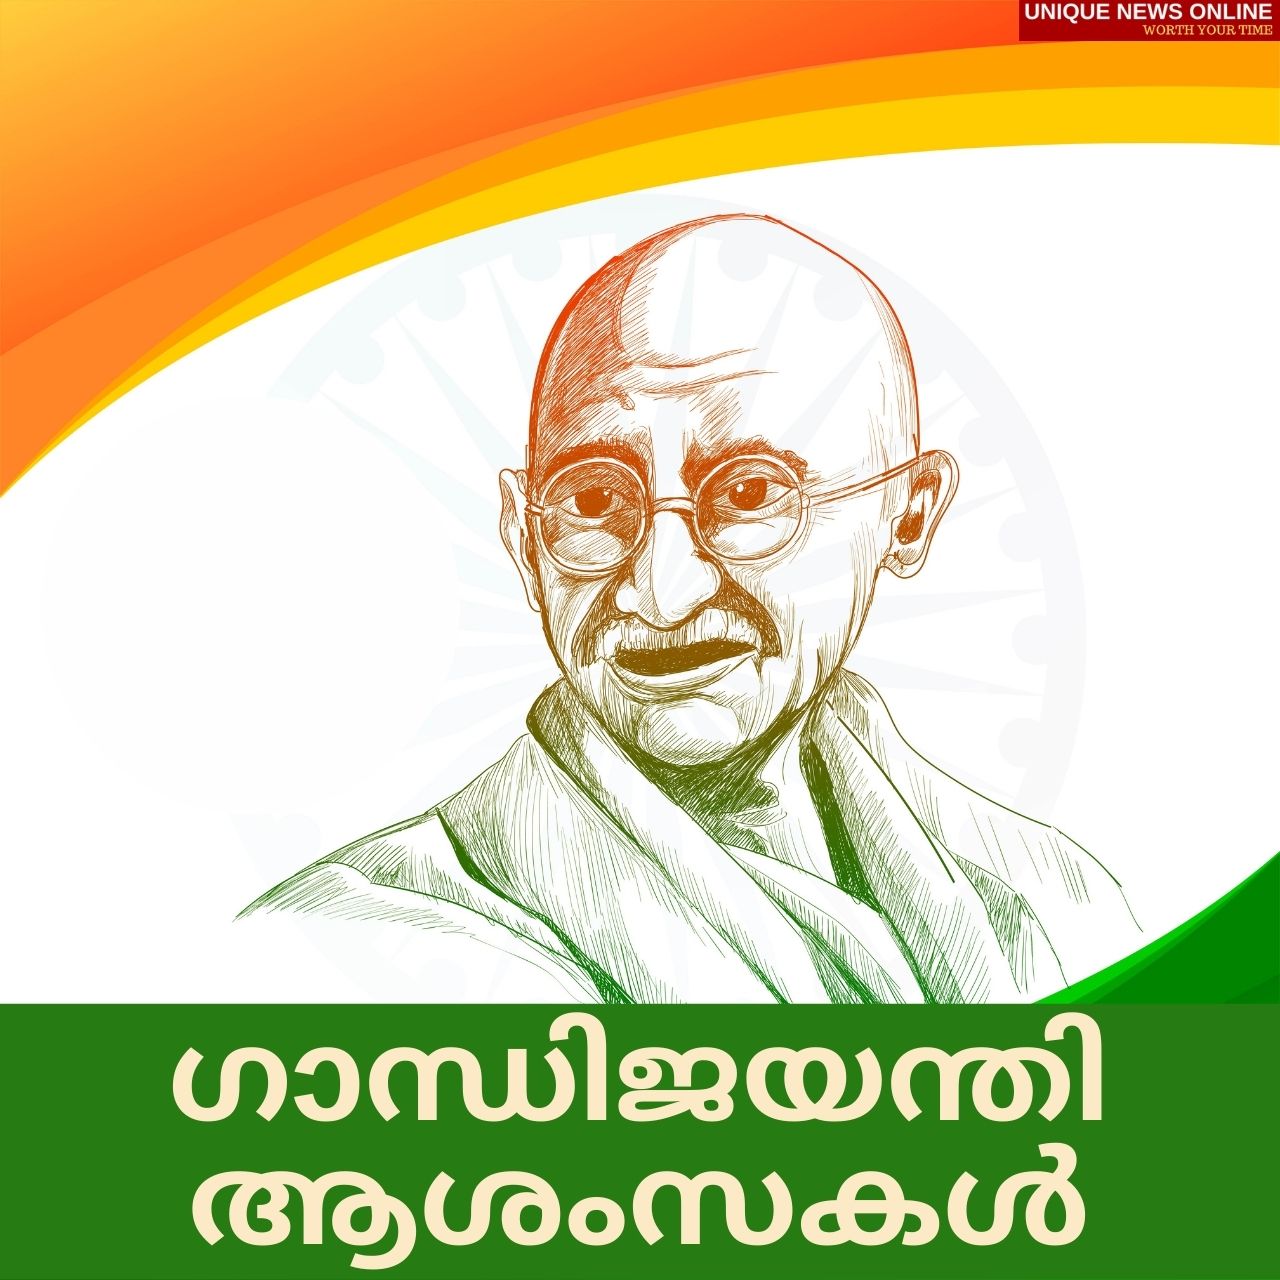 Gandhi Jayanti 2021 Malayalam Wishes, Quotes, Messages, Wishes, Greetings, and HD Images to share